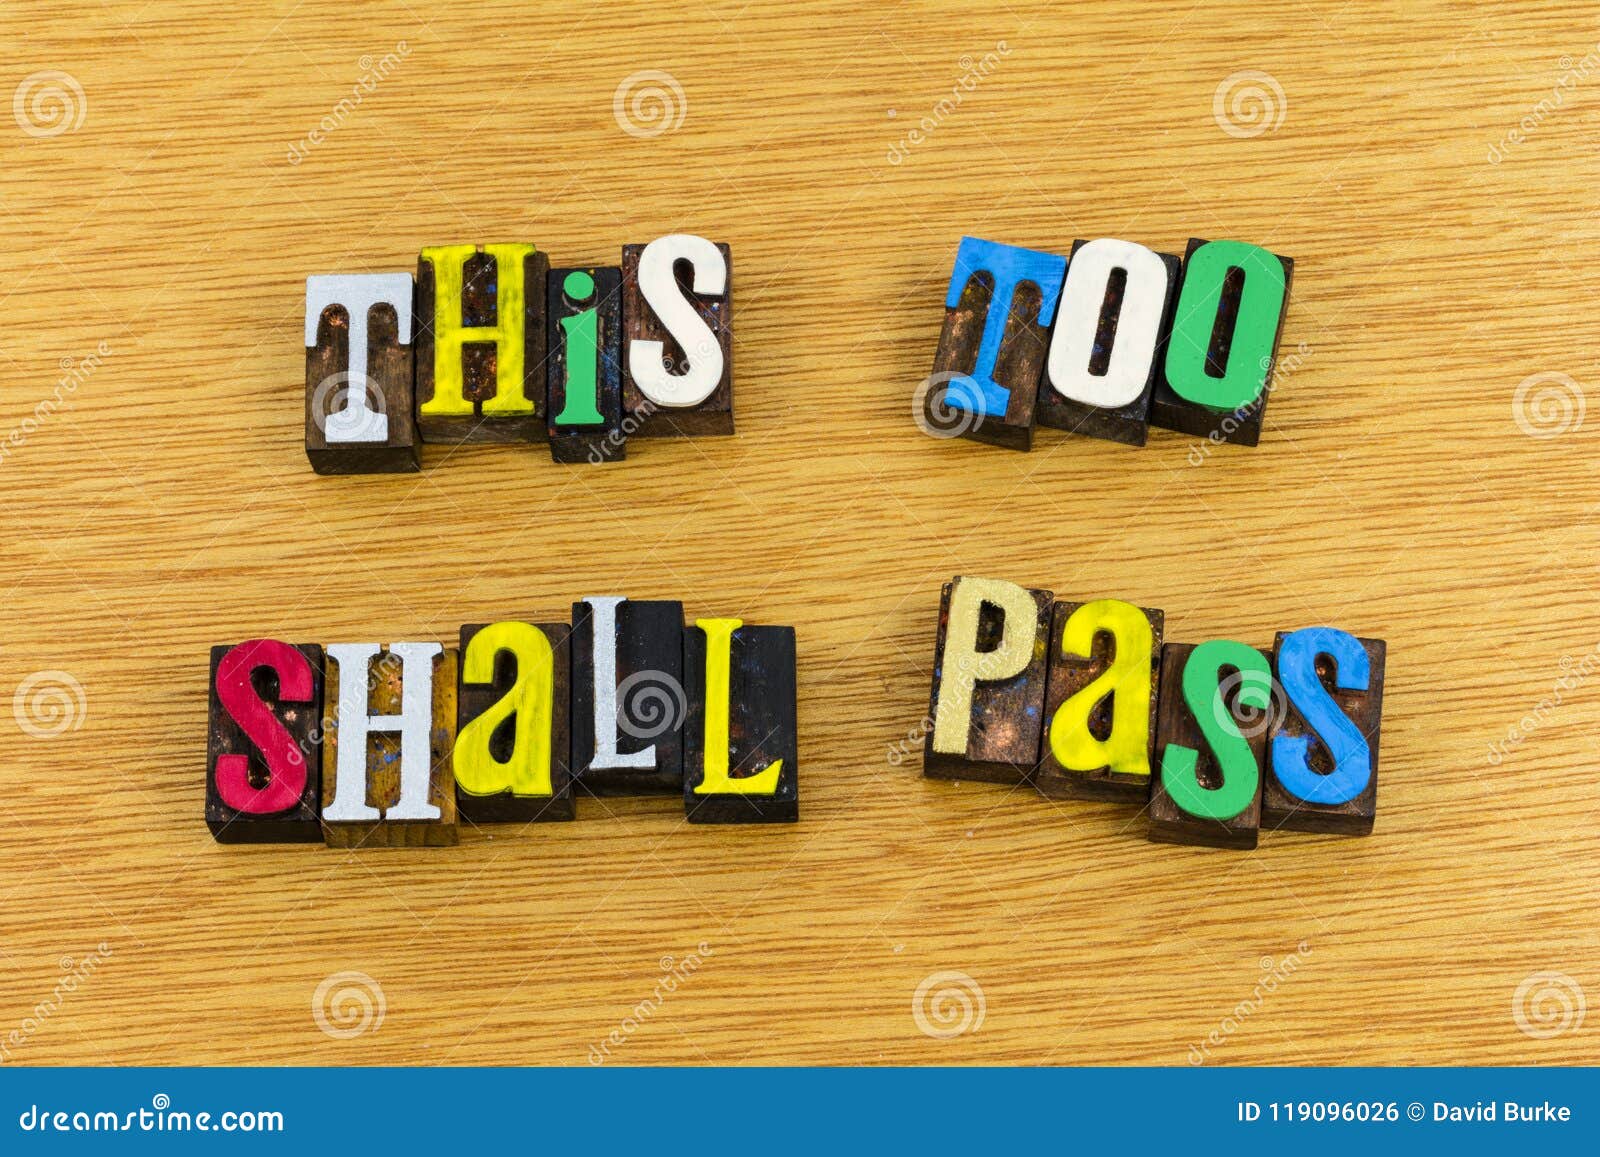 this too shall pass optimism positive attitude